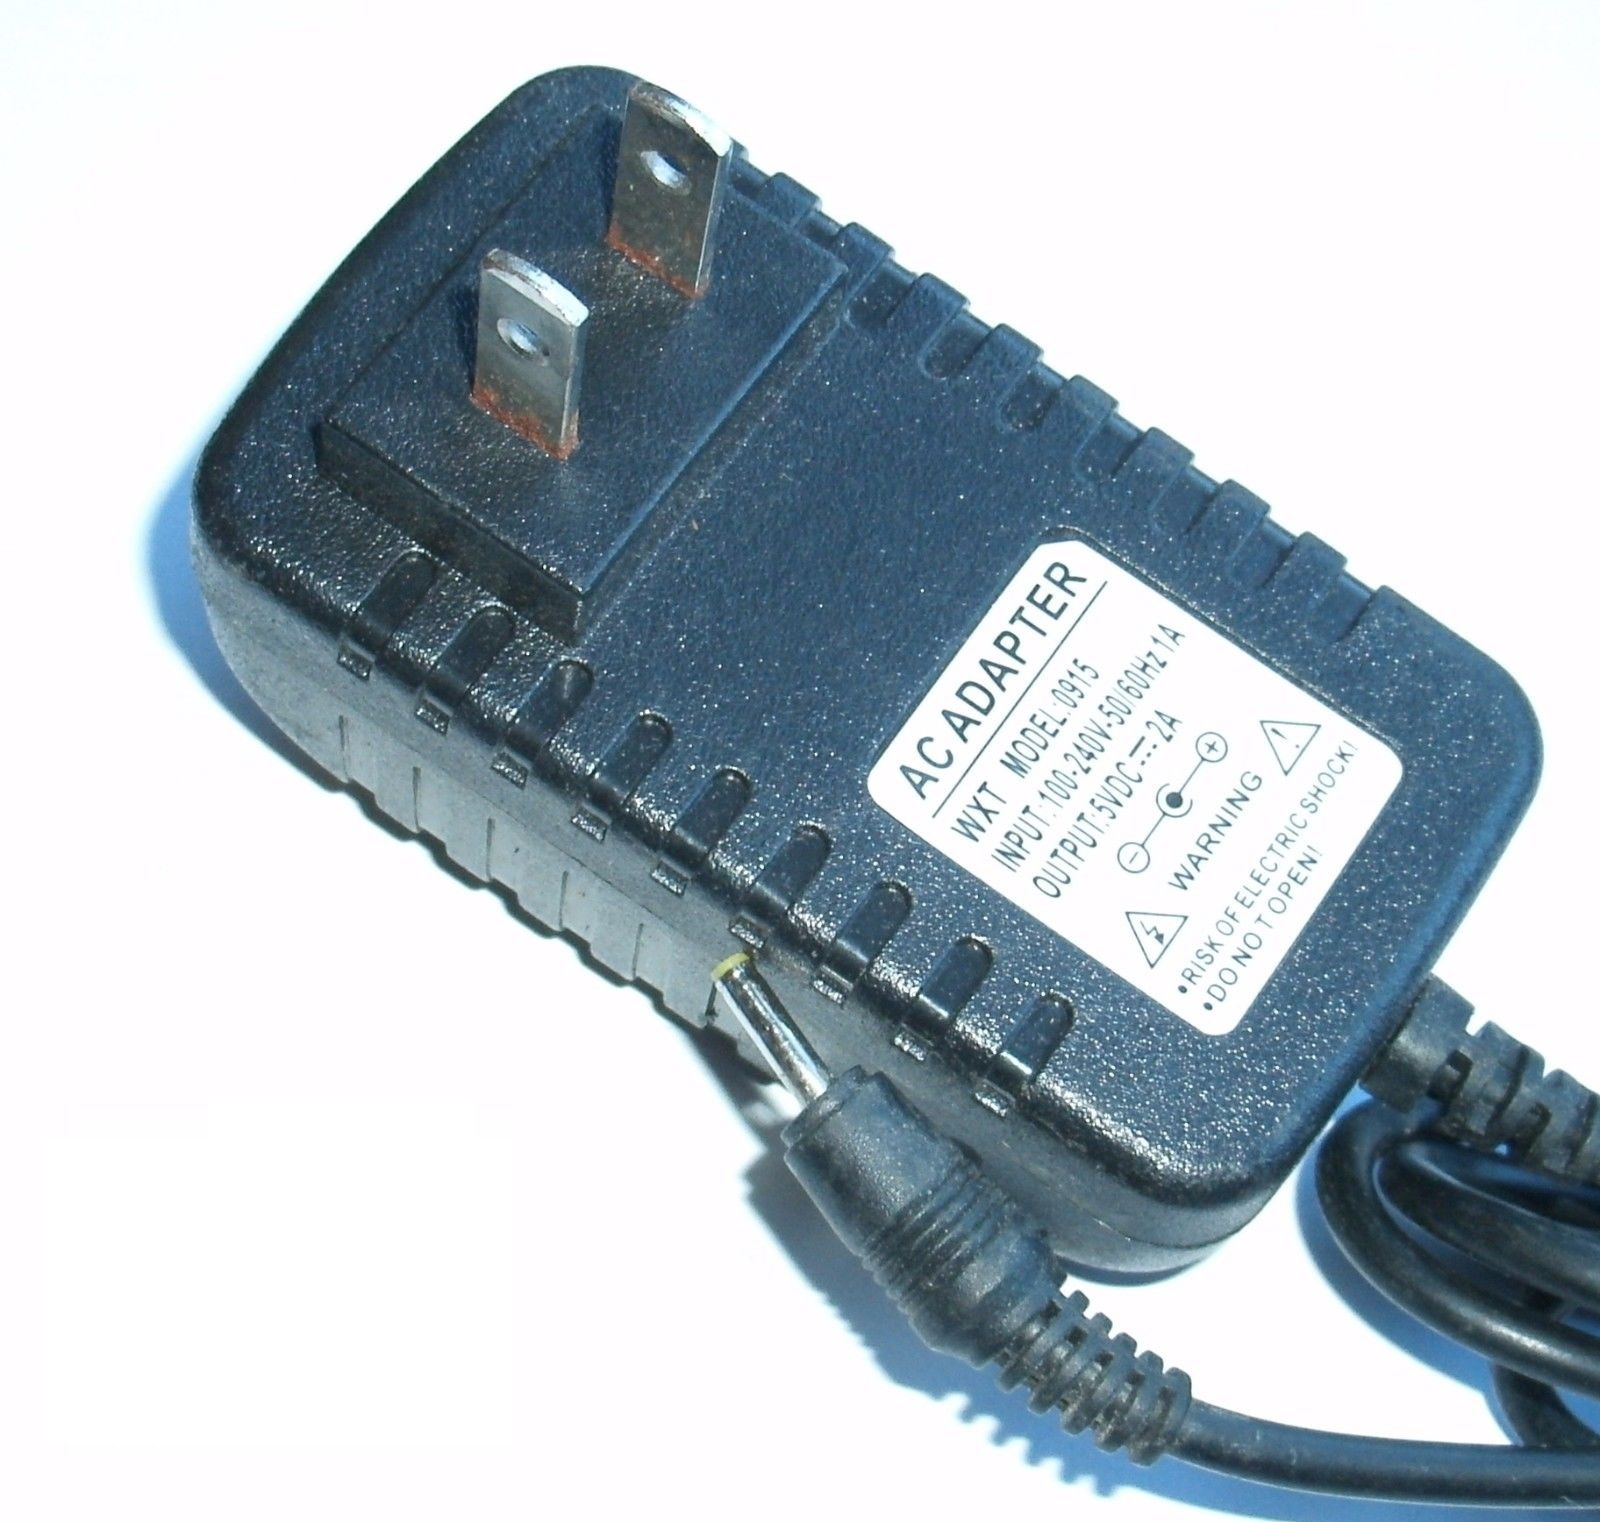 *100% Brand NEW* AC ADAPTER 5V DC 2A WXT 0915 POWER SUPPLY